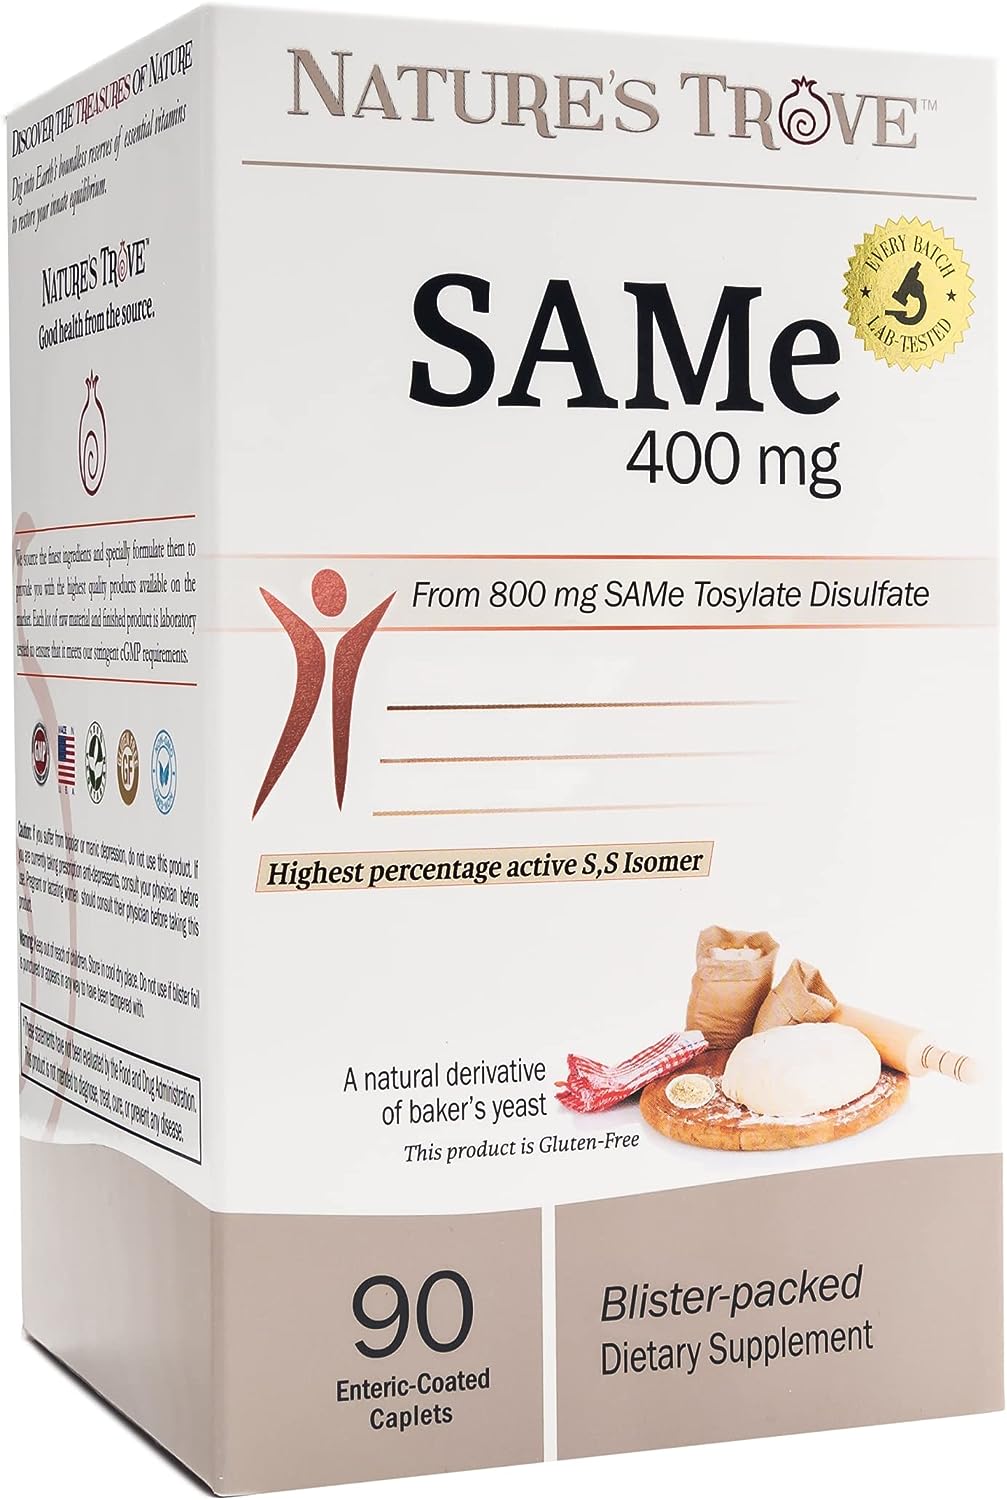 Natures Trove SAM-e 400mg 90 Enteric Coated Caplets. Vegan, Kosher, Non-GMO Project Verified, Soy Free, Gluten Free - Cold Form Blister Packed.